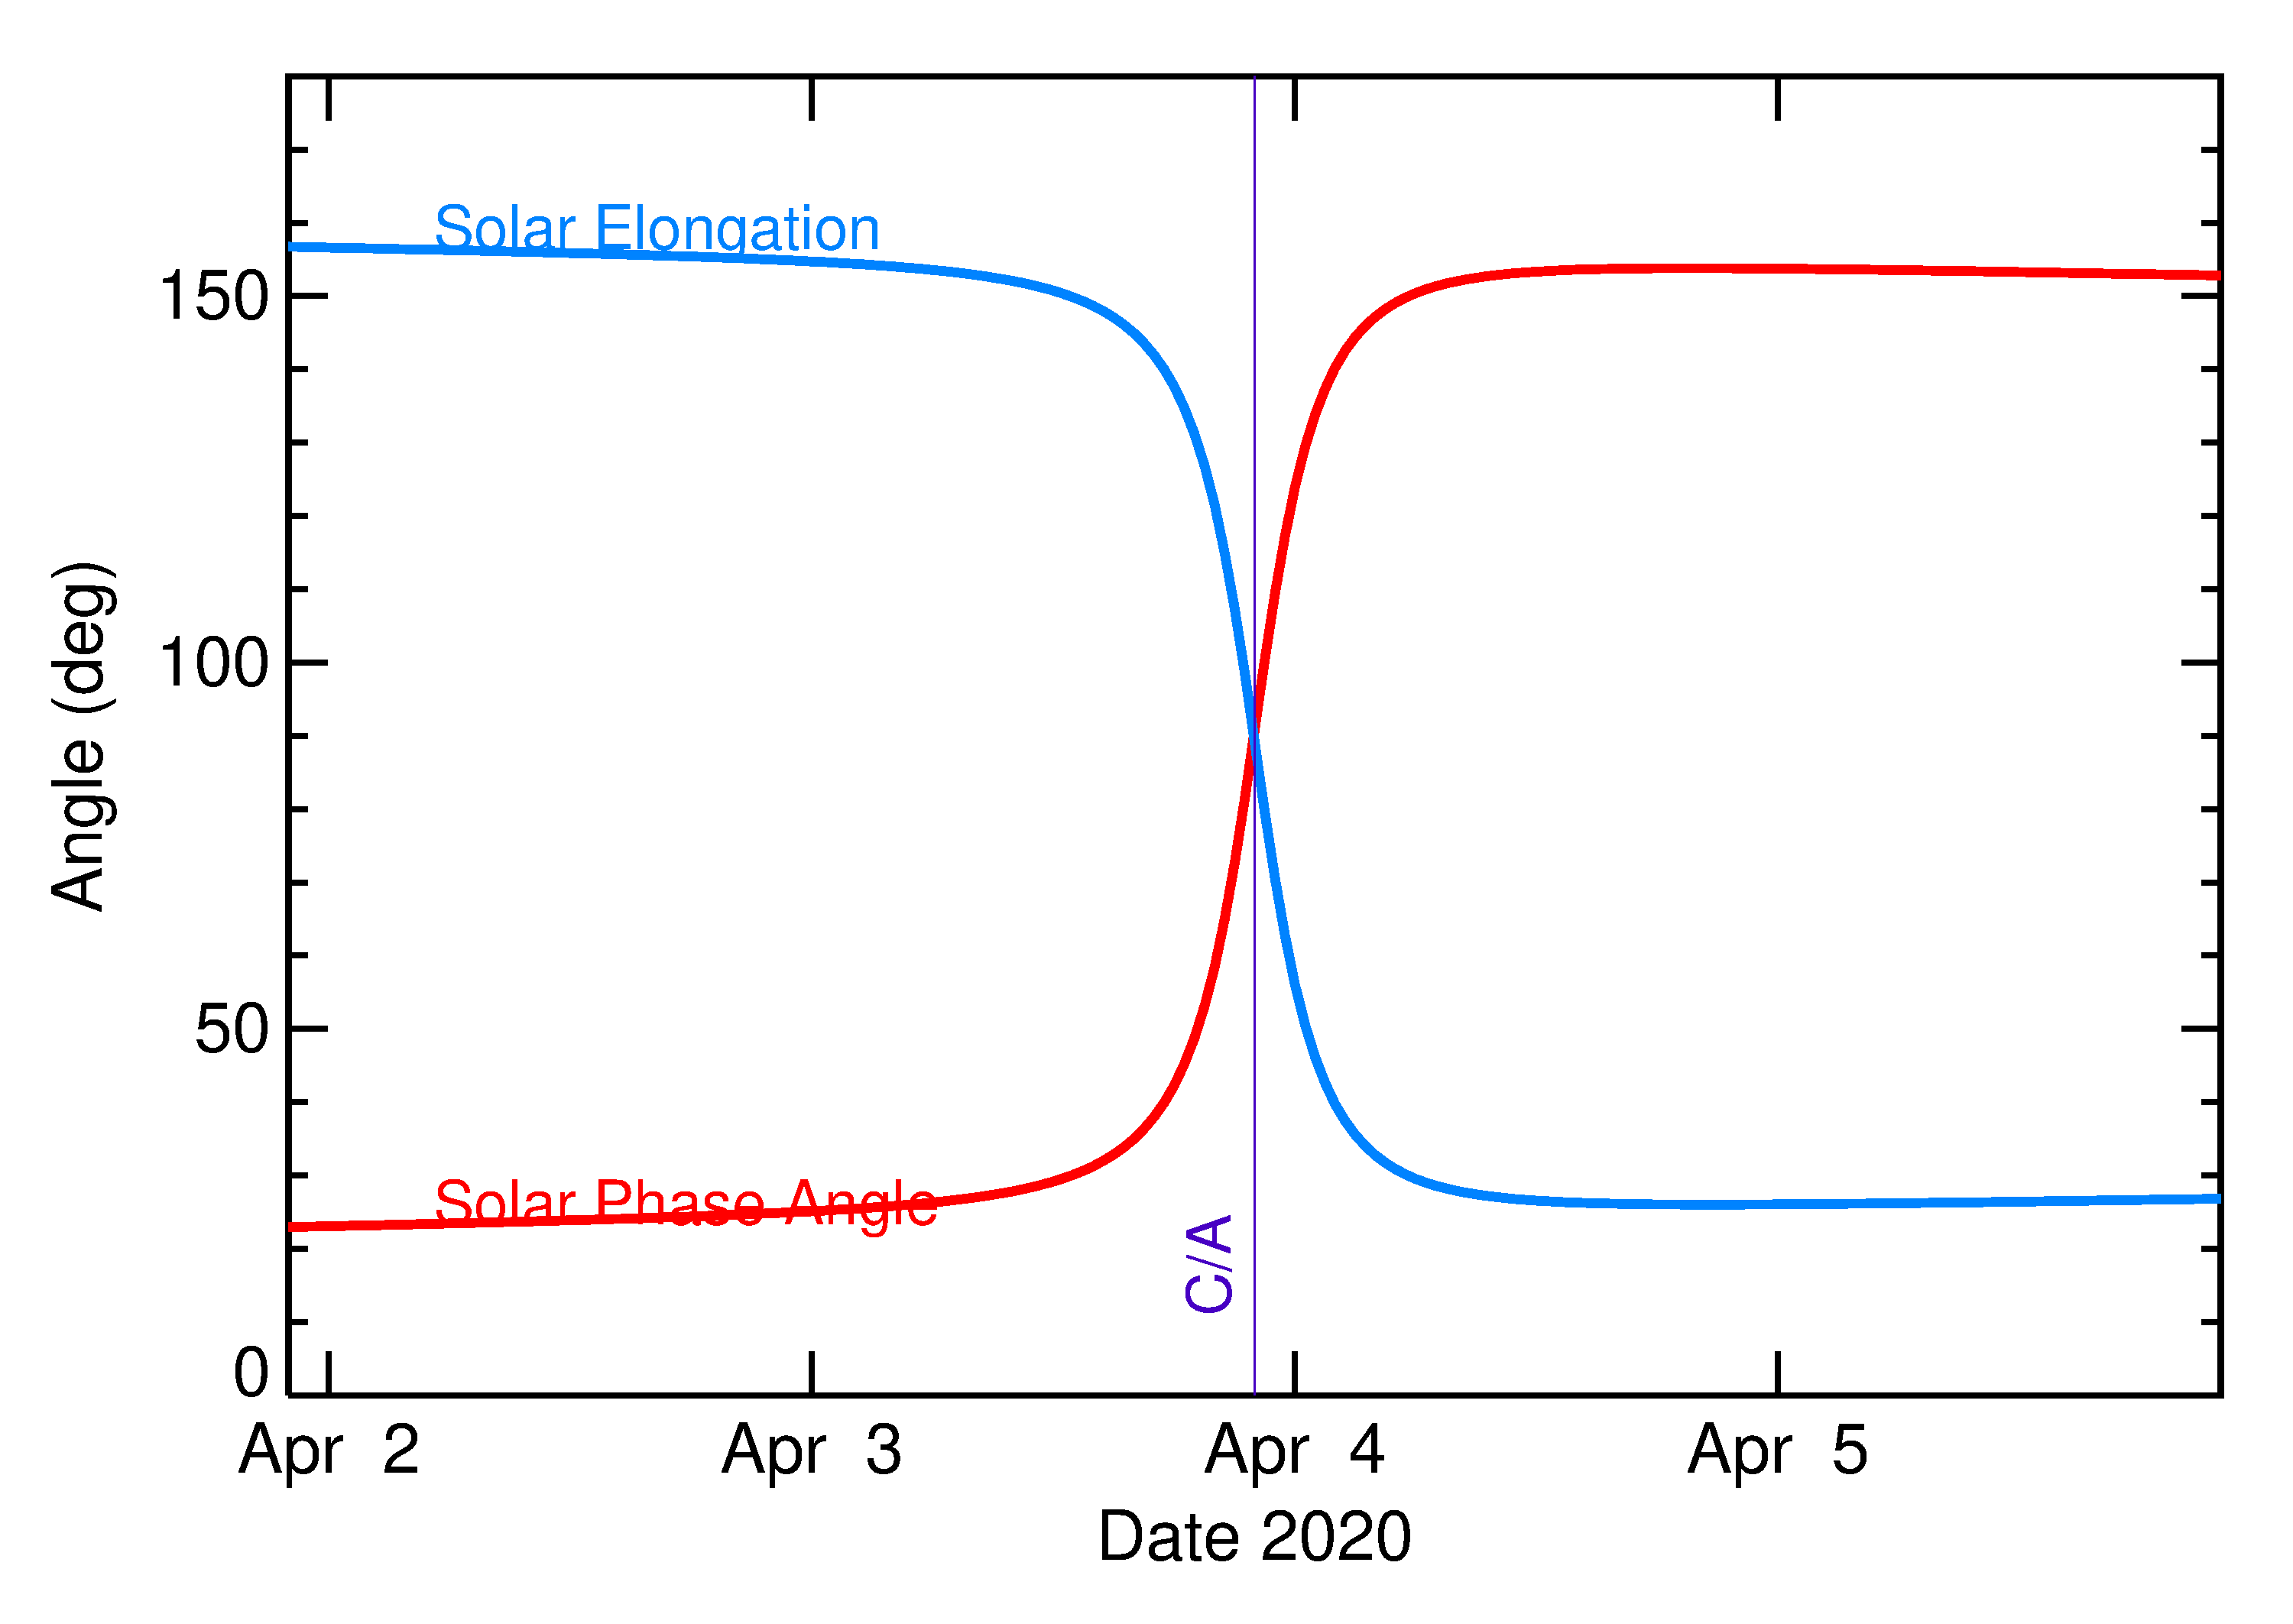 Solar Elongation and Solar Phase Angle of 2020 GH in the days around closest approach